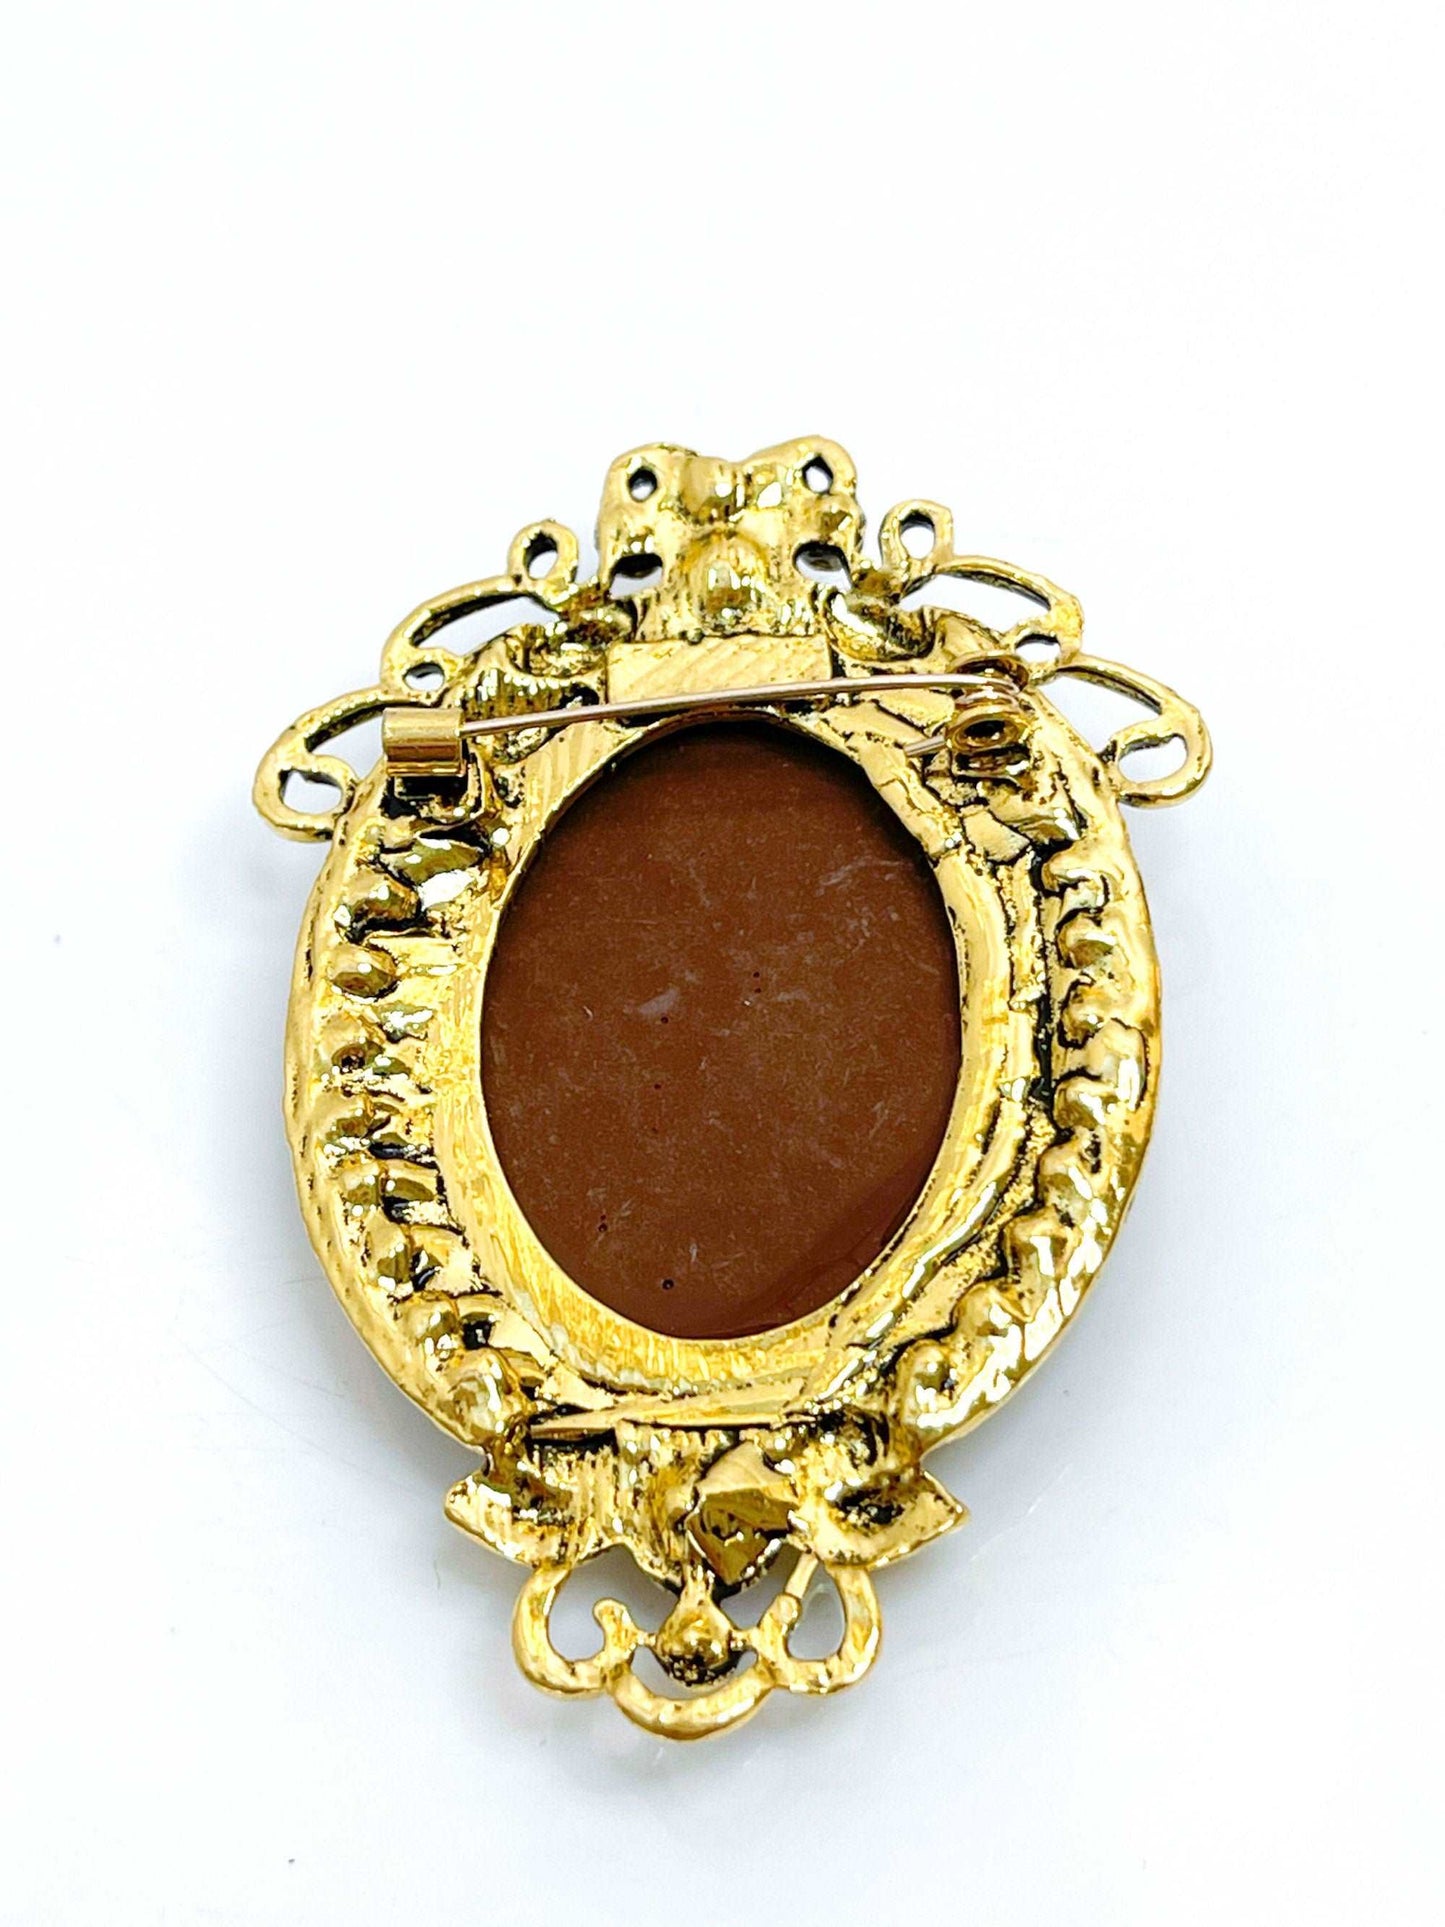 Gorgeous Vintage Cameo Brooch| Victorian Lady Brooch | Stylish Cameo Pin 